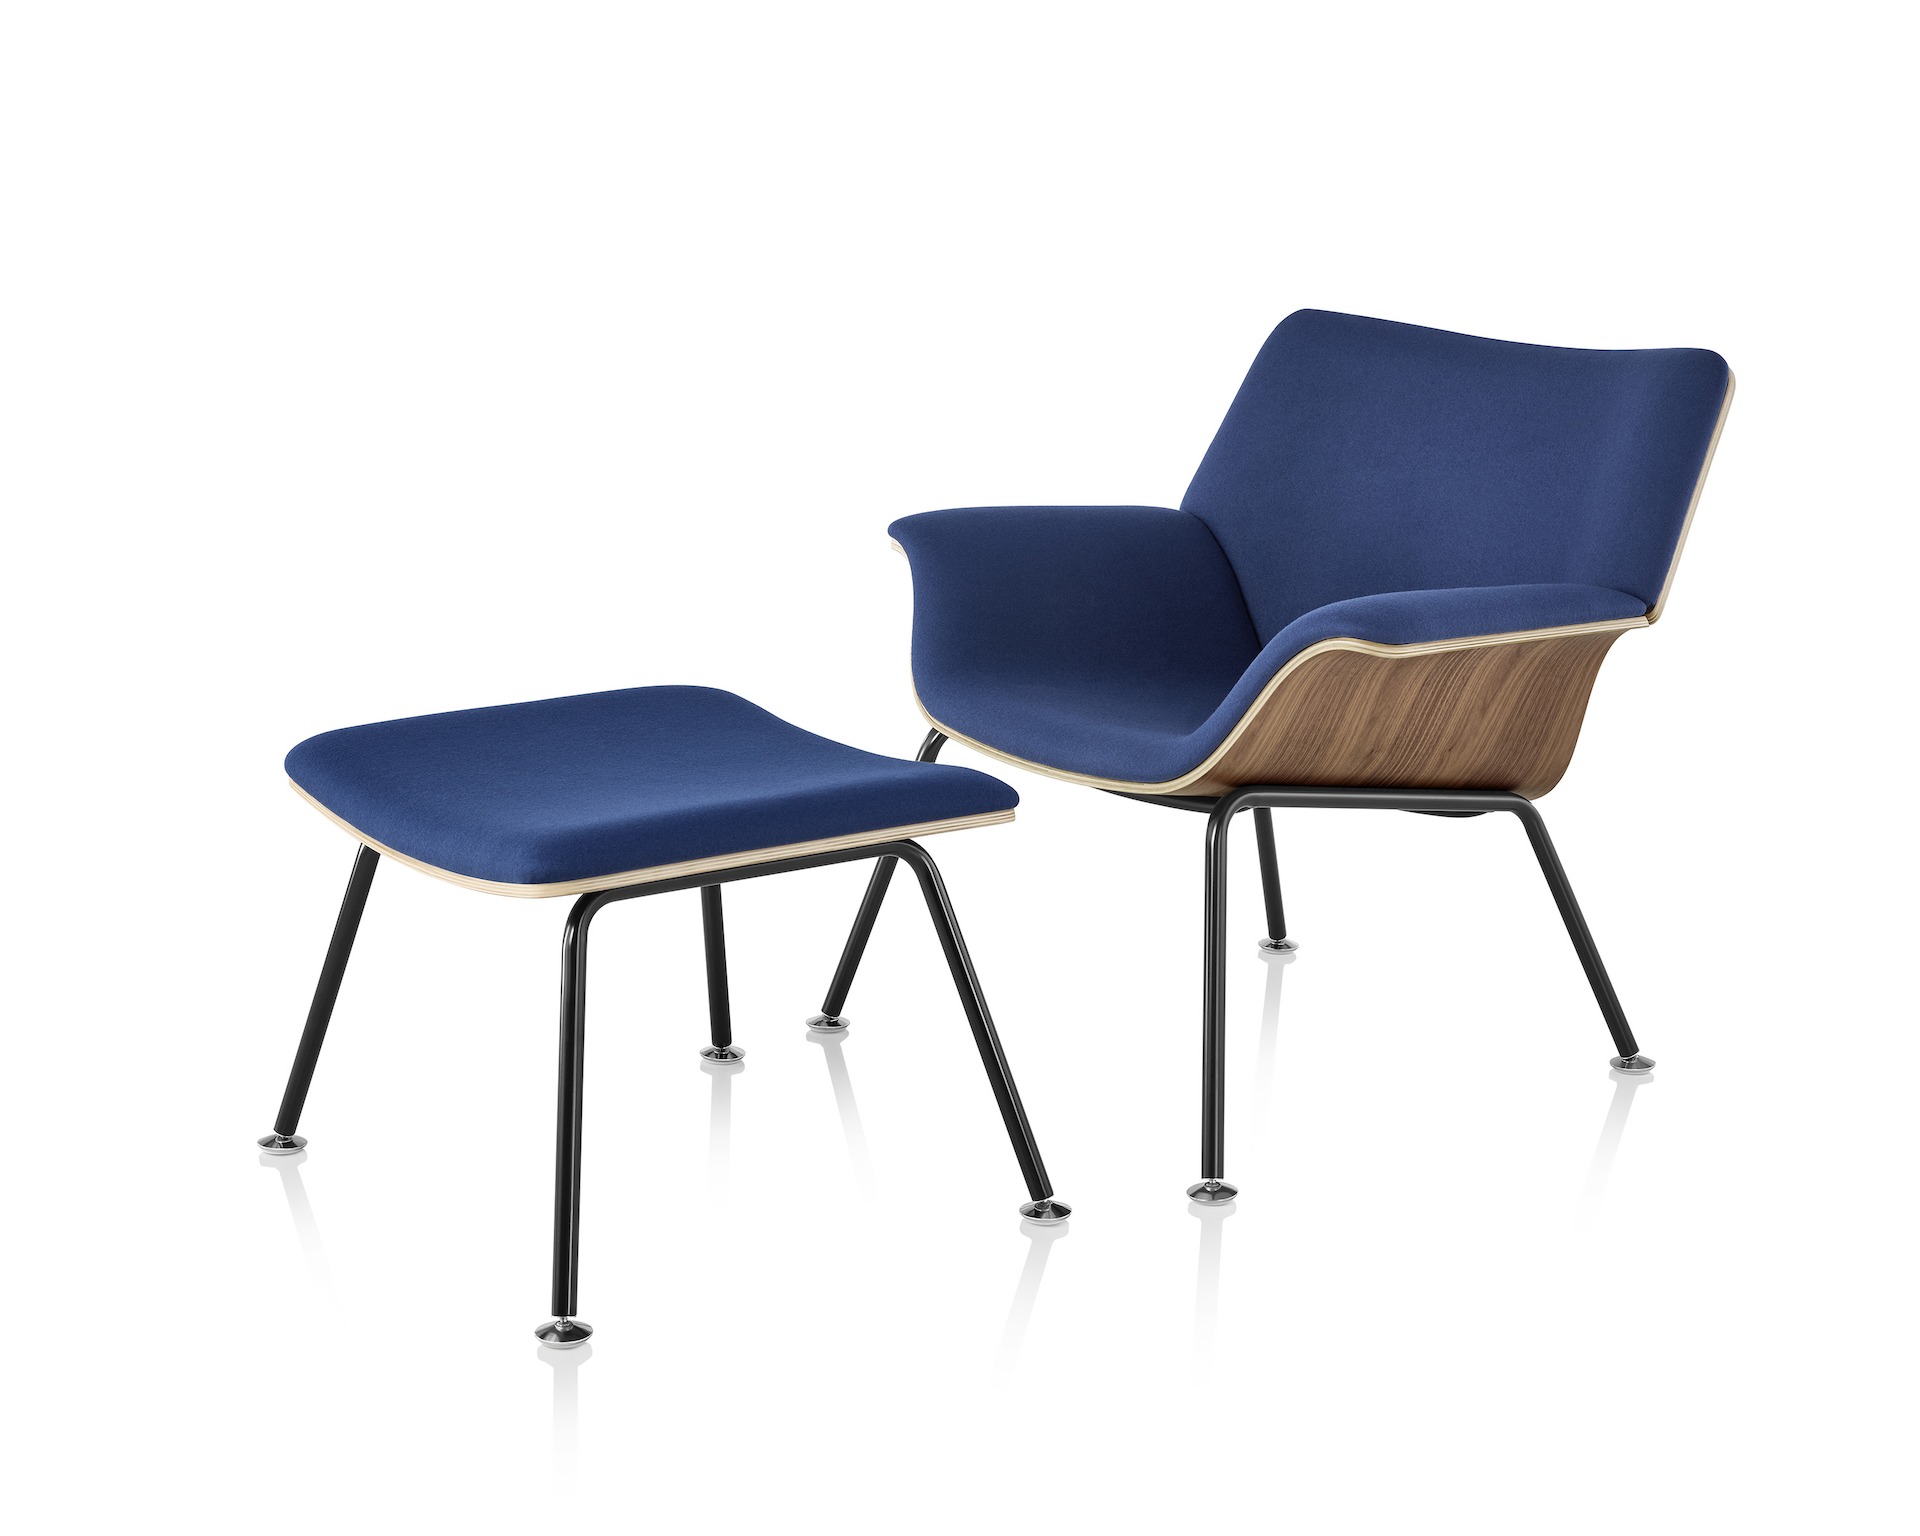 Swoop Plywood Lounge Chair and Ottoman with dark royal blue upholstery viewed from a 45-degree angle